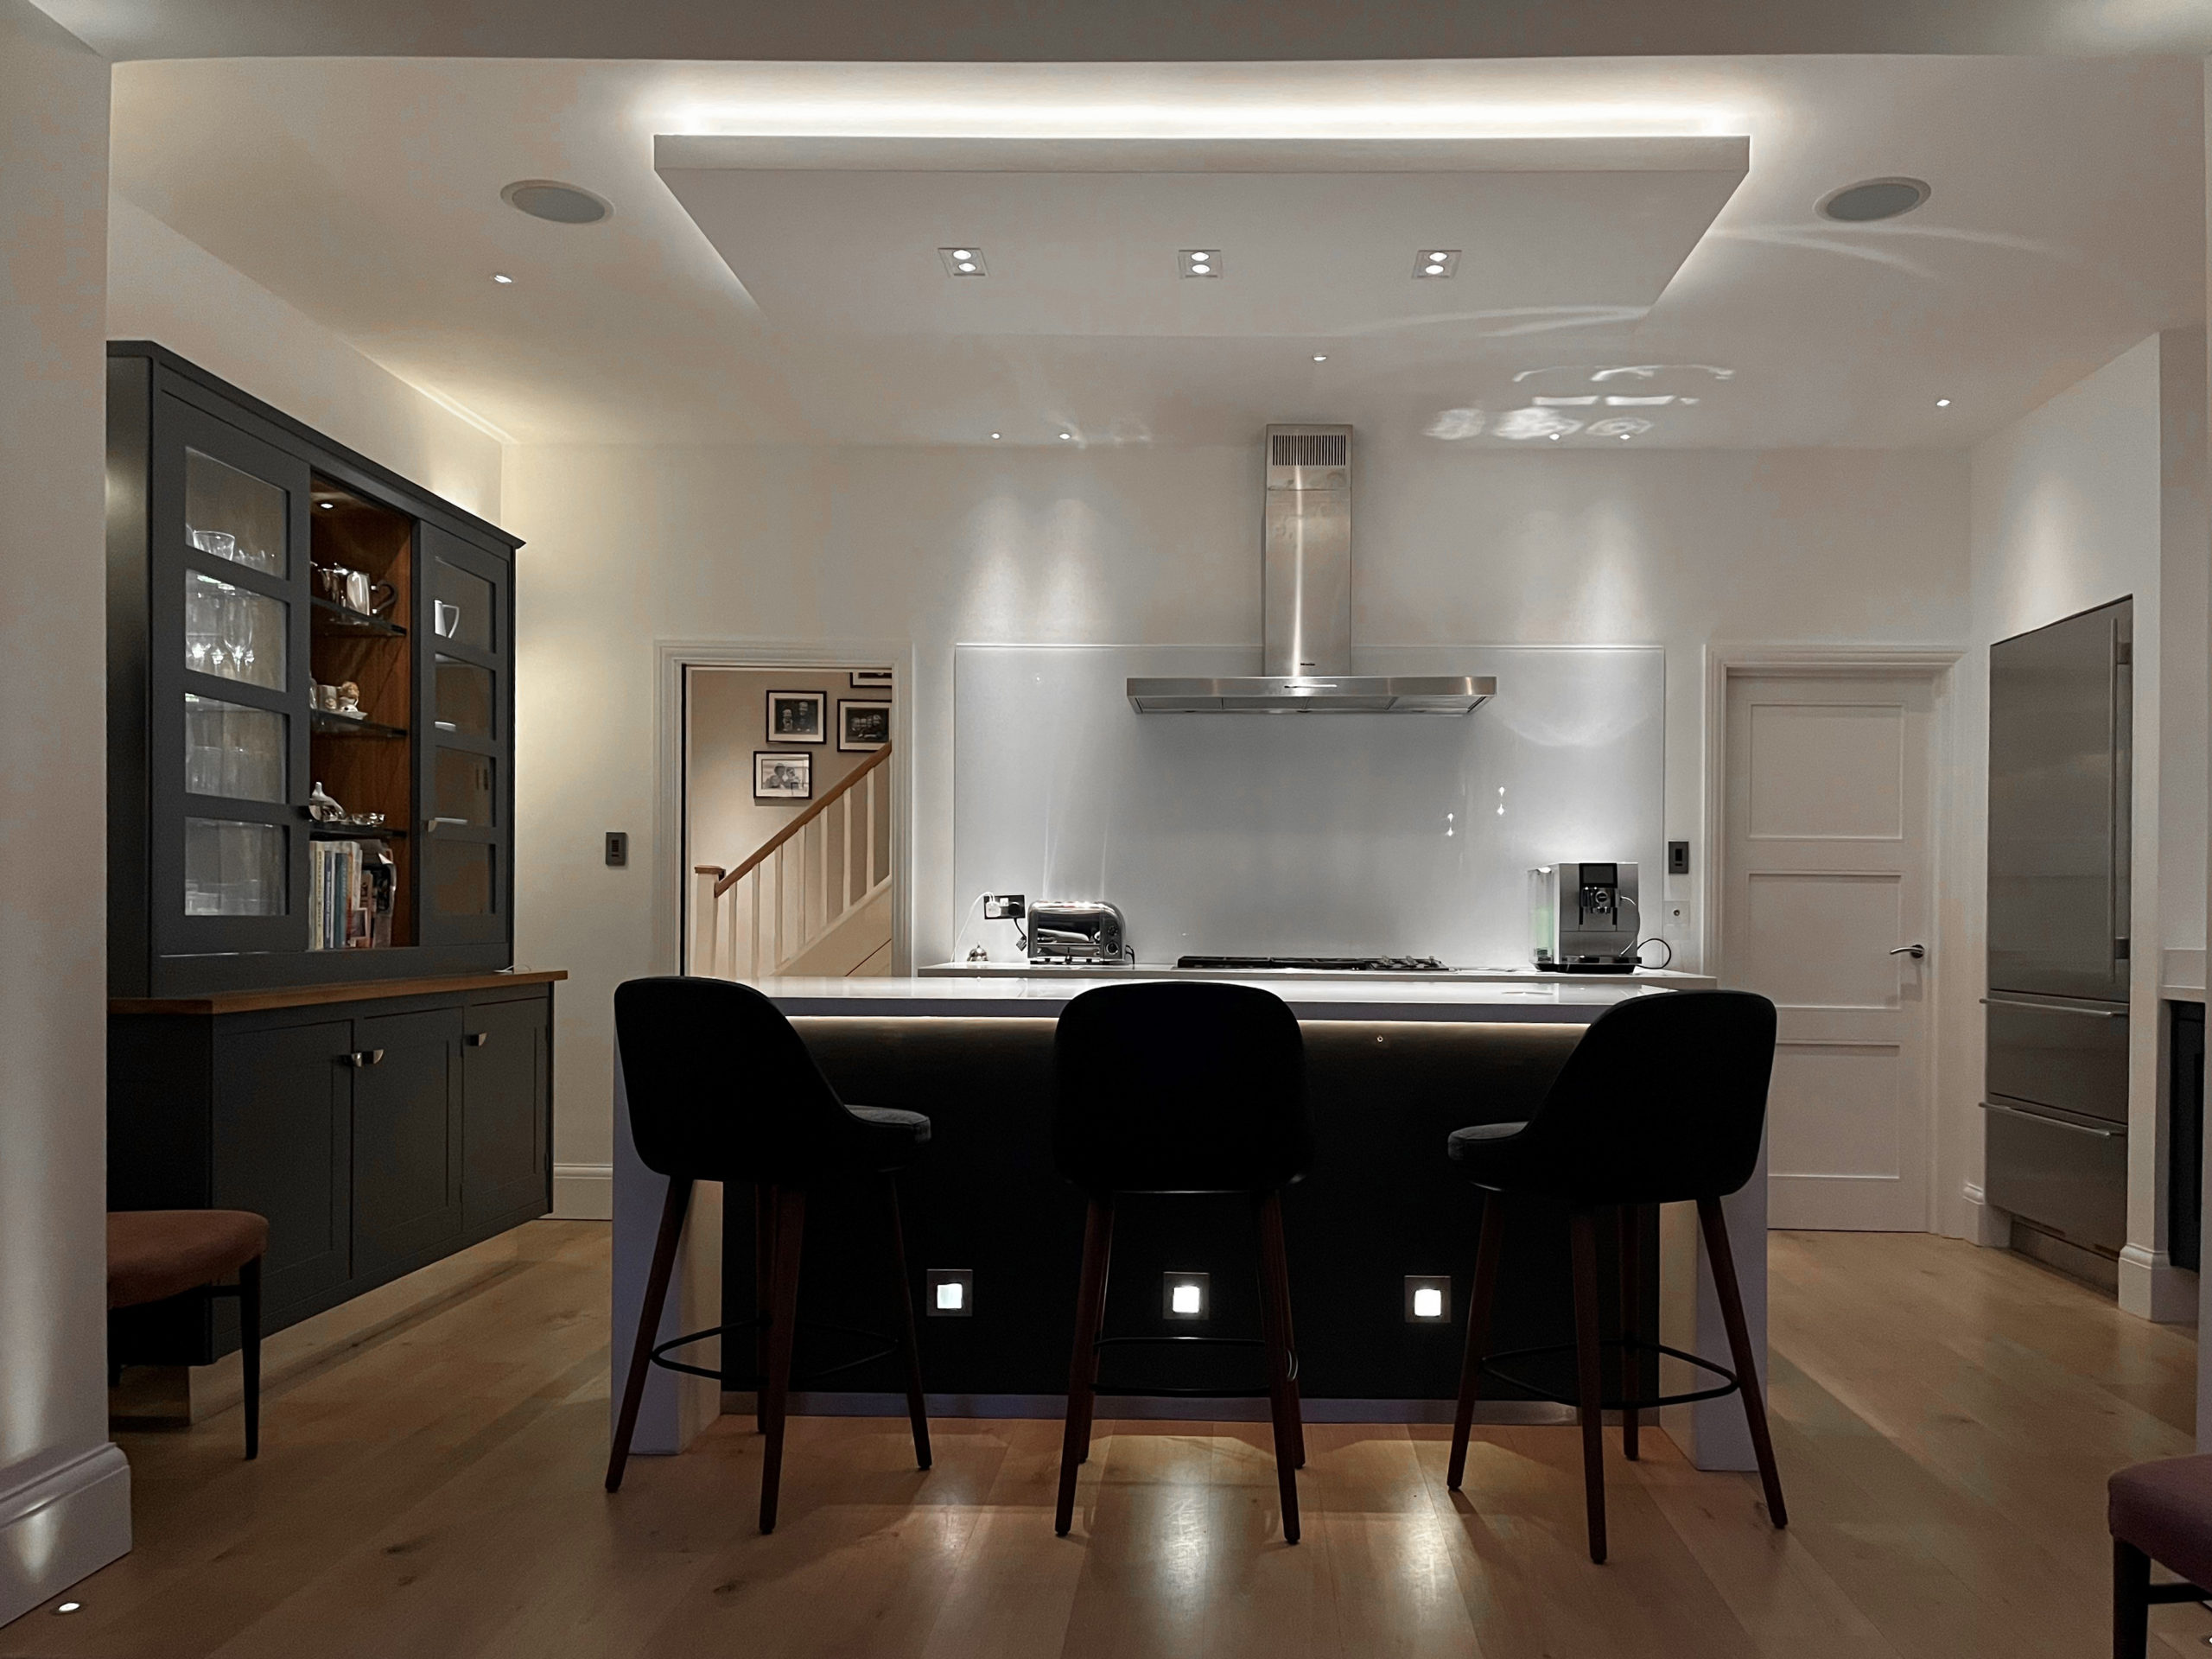 Kitchen with downlights, floor washers and LED strip